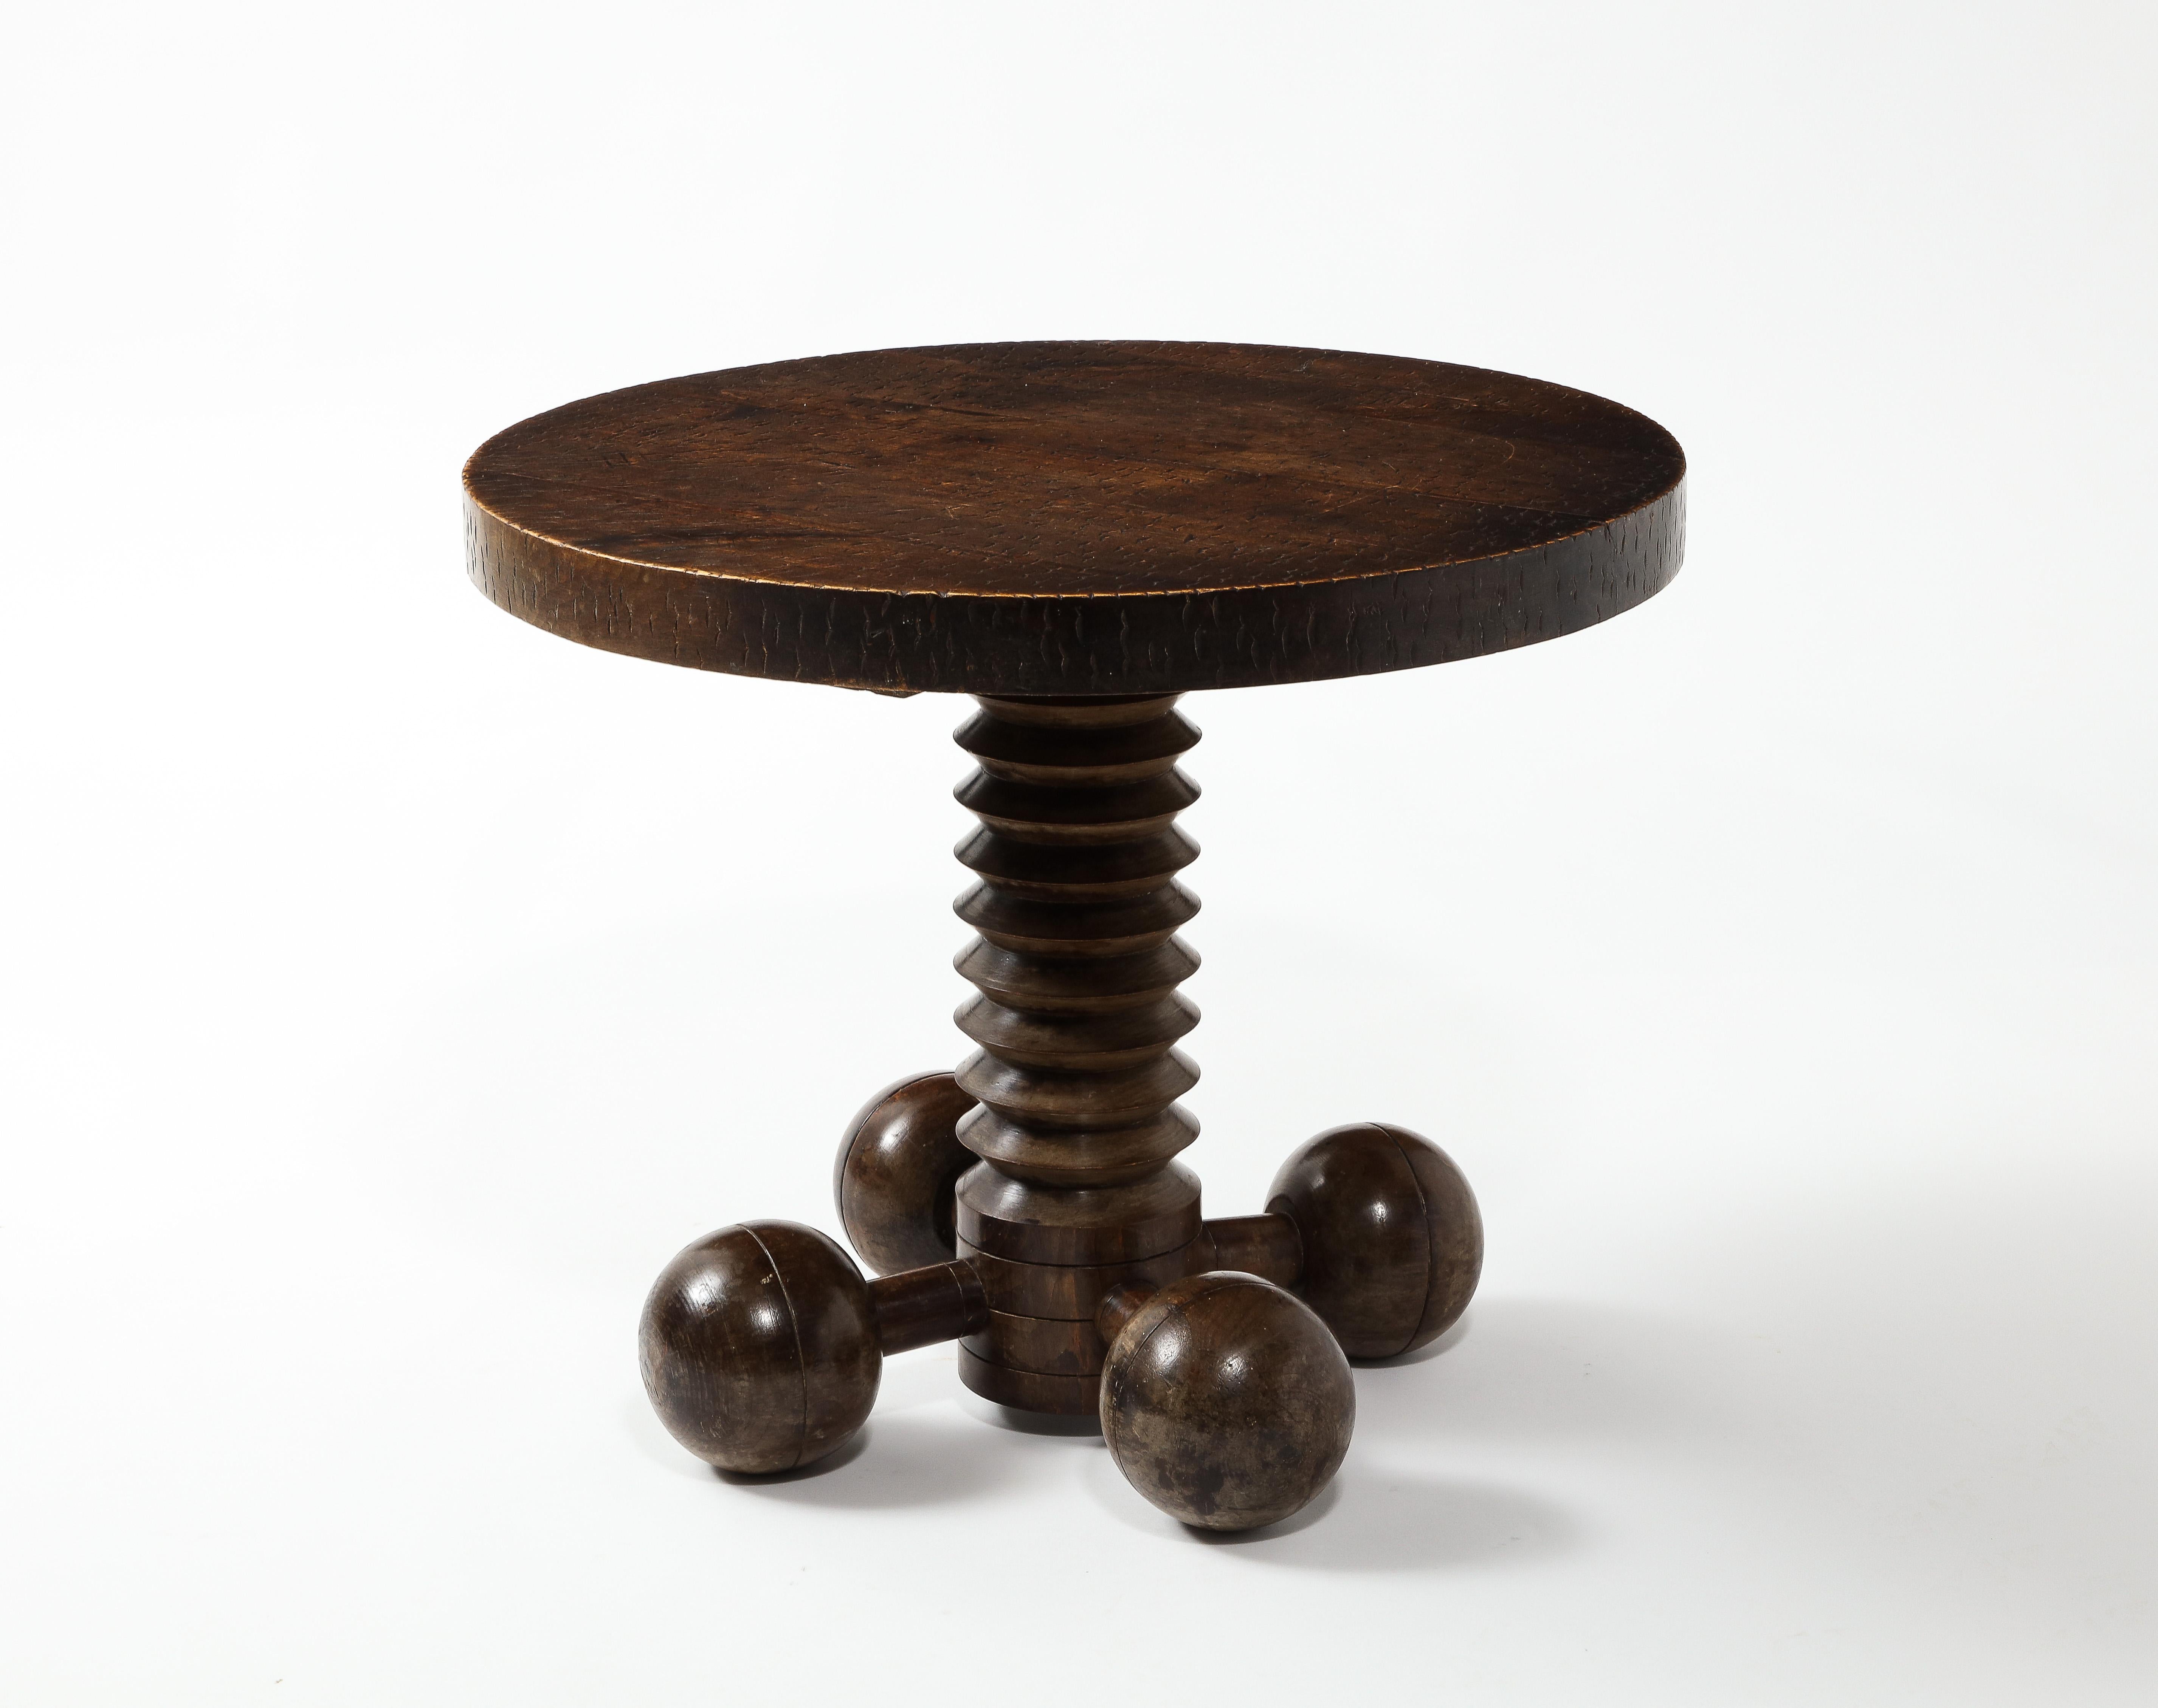 A very unusual variation of this well-known design by Dudouyt, this table has four spheres supporting it versus the usual three. A rare find.